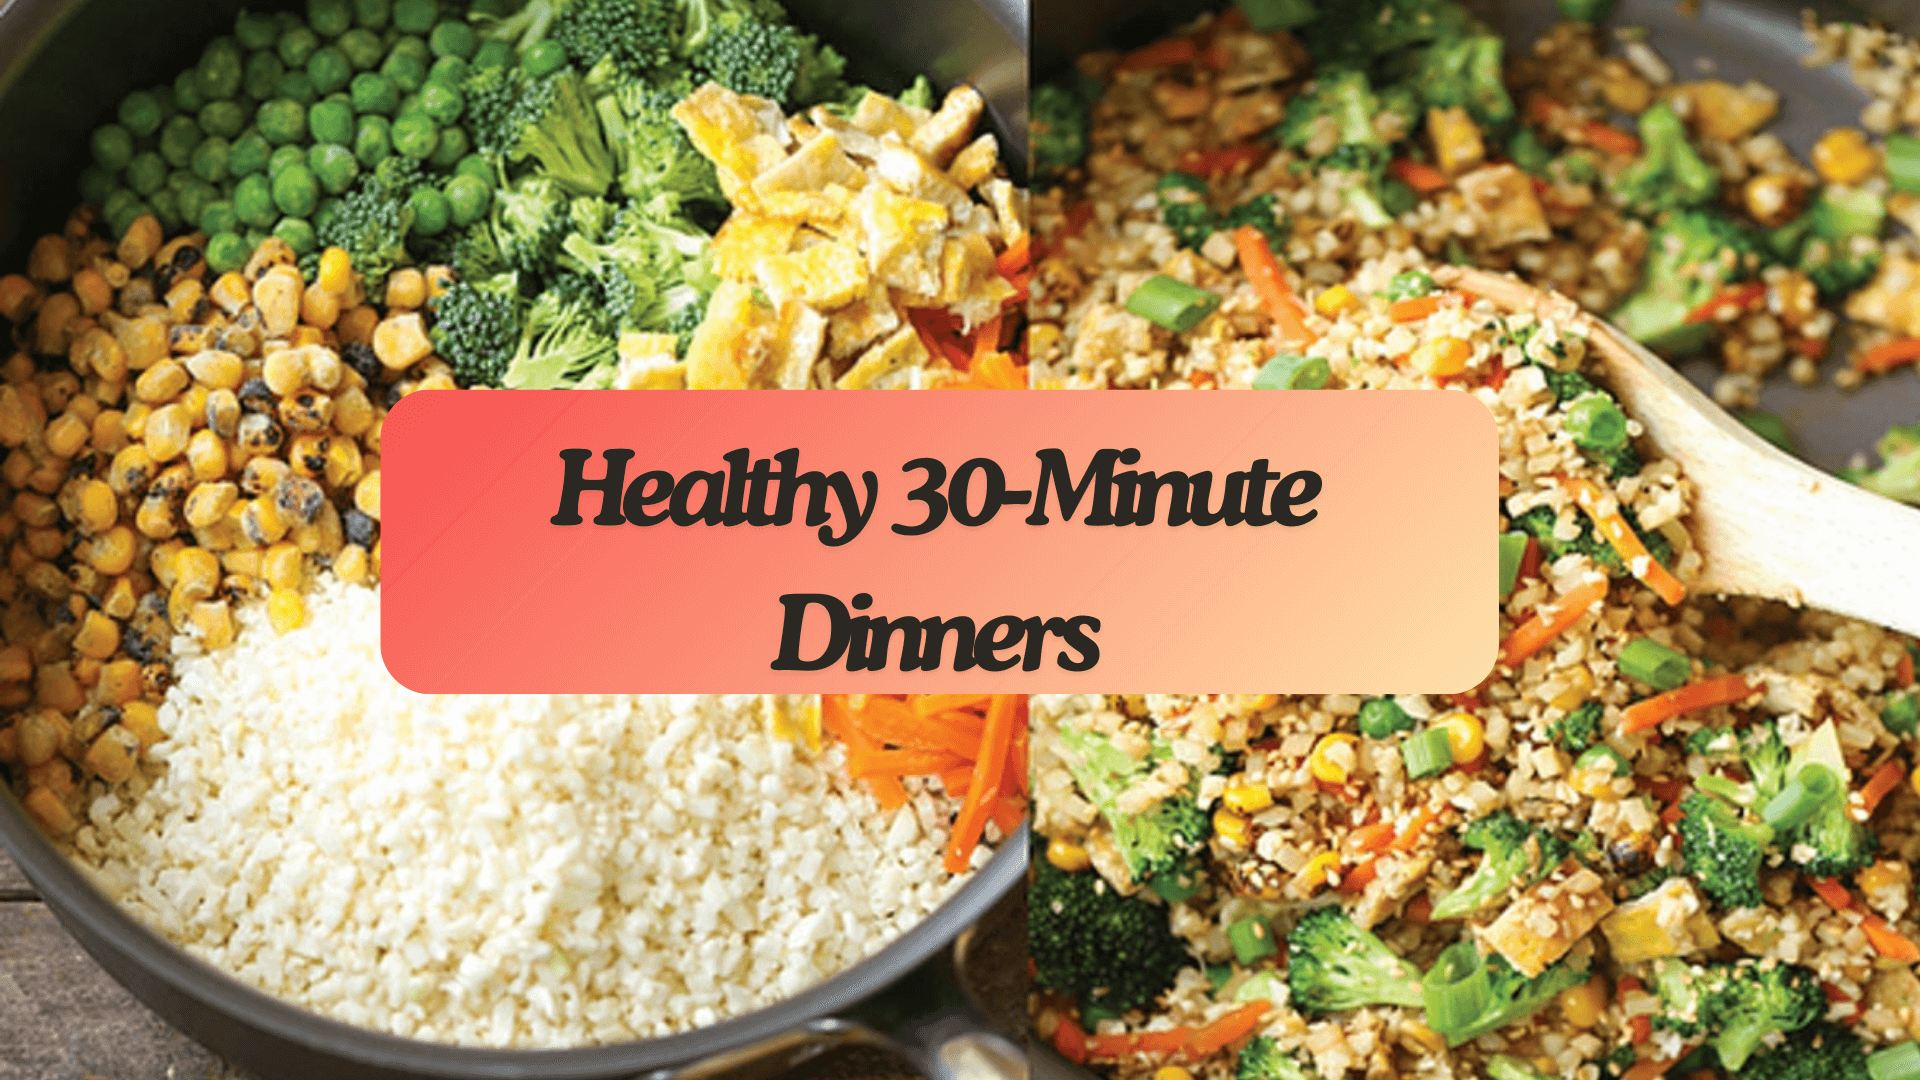 Enjoy Healthy 30-Minute Dinners That Are Both Nutritious and Delicious